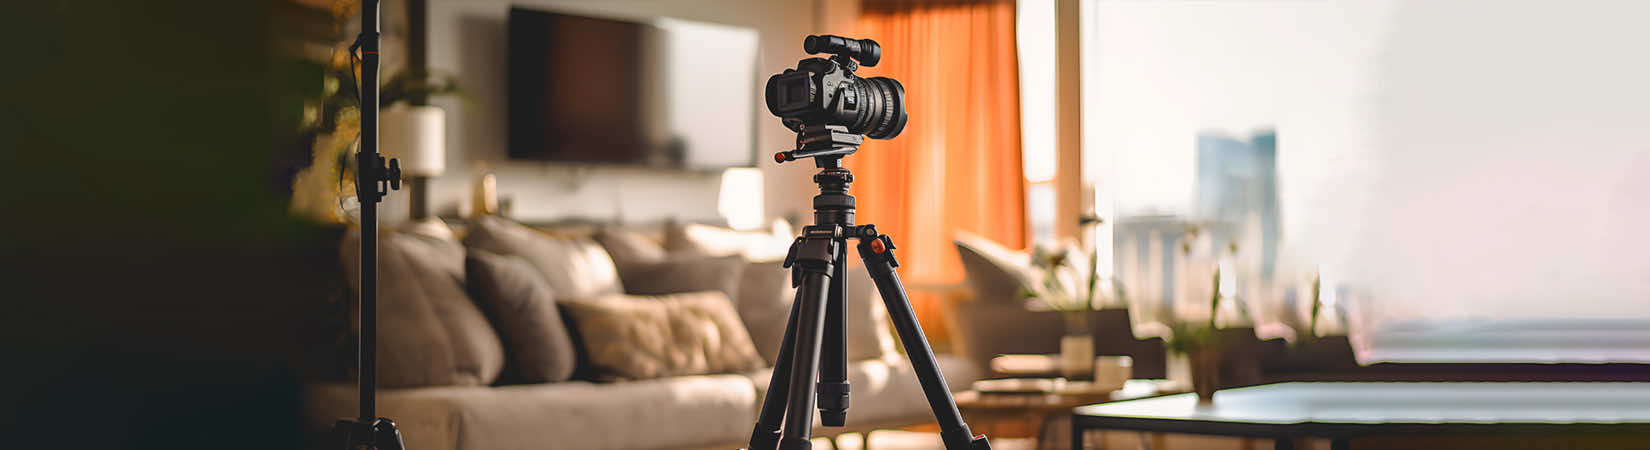 frequently asked questions real estate photography